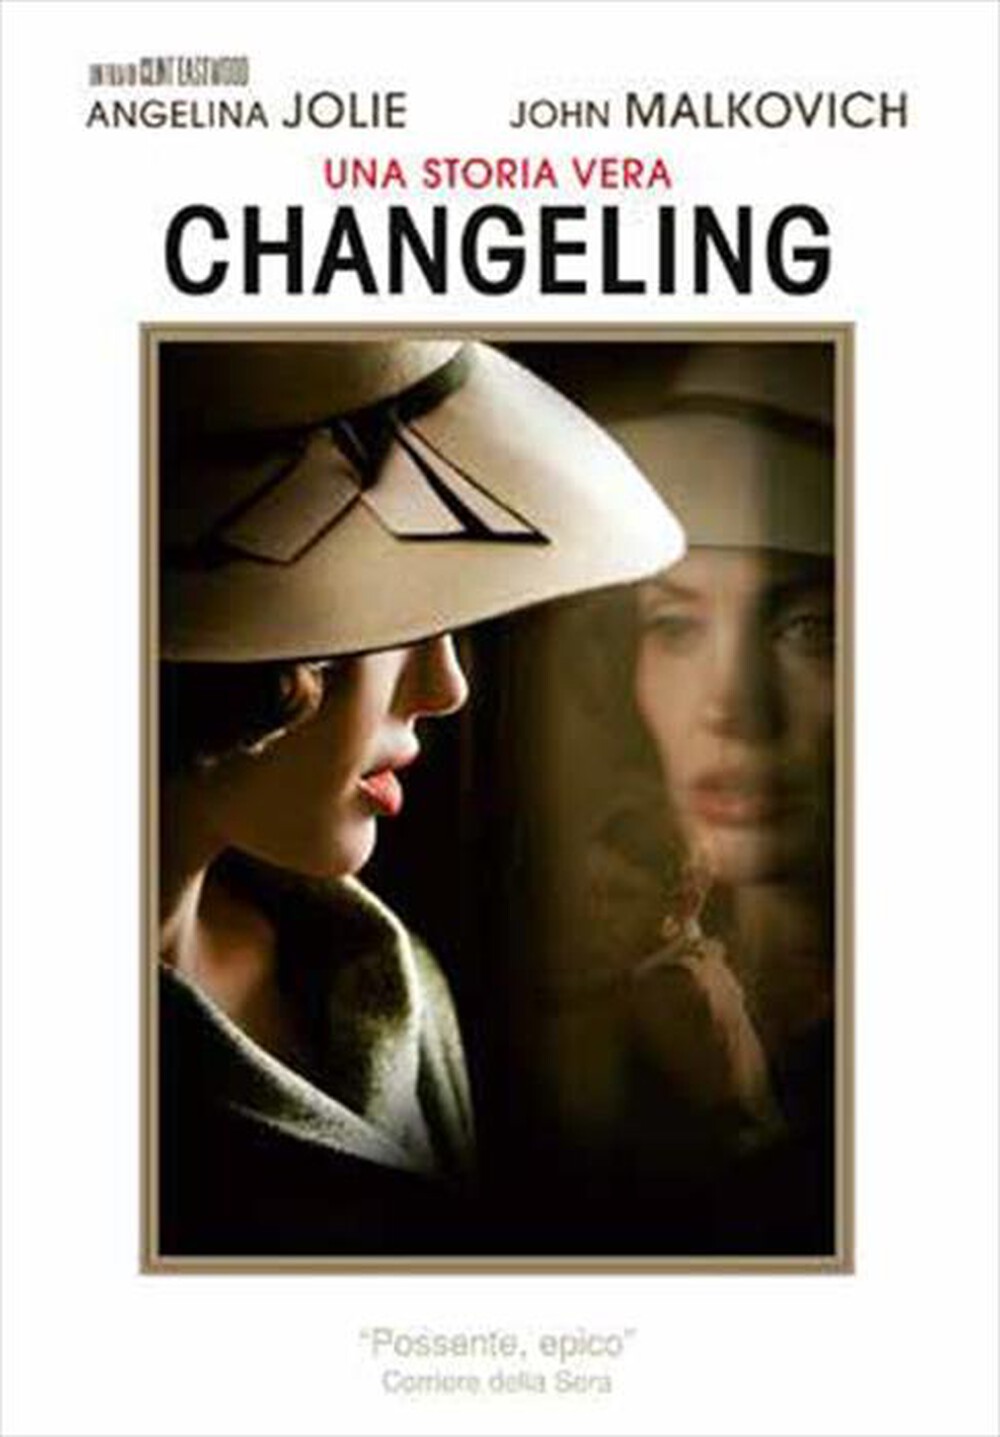 "UNIVERSAL PICTURES - Changeling"